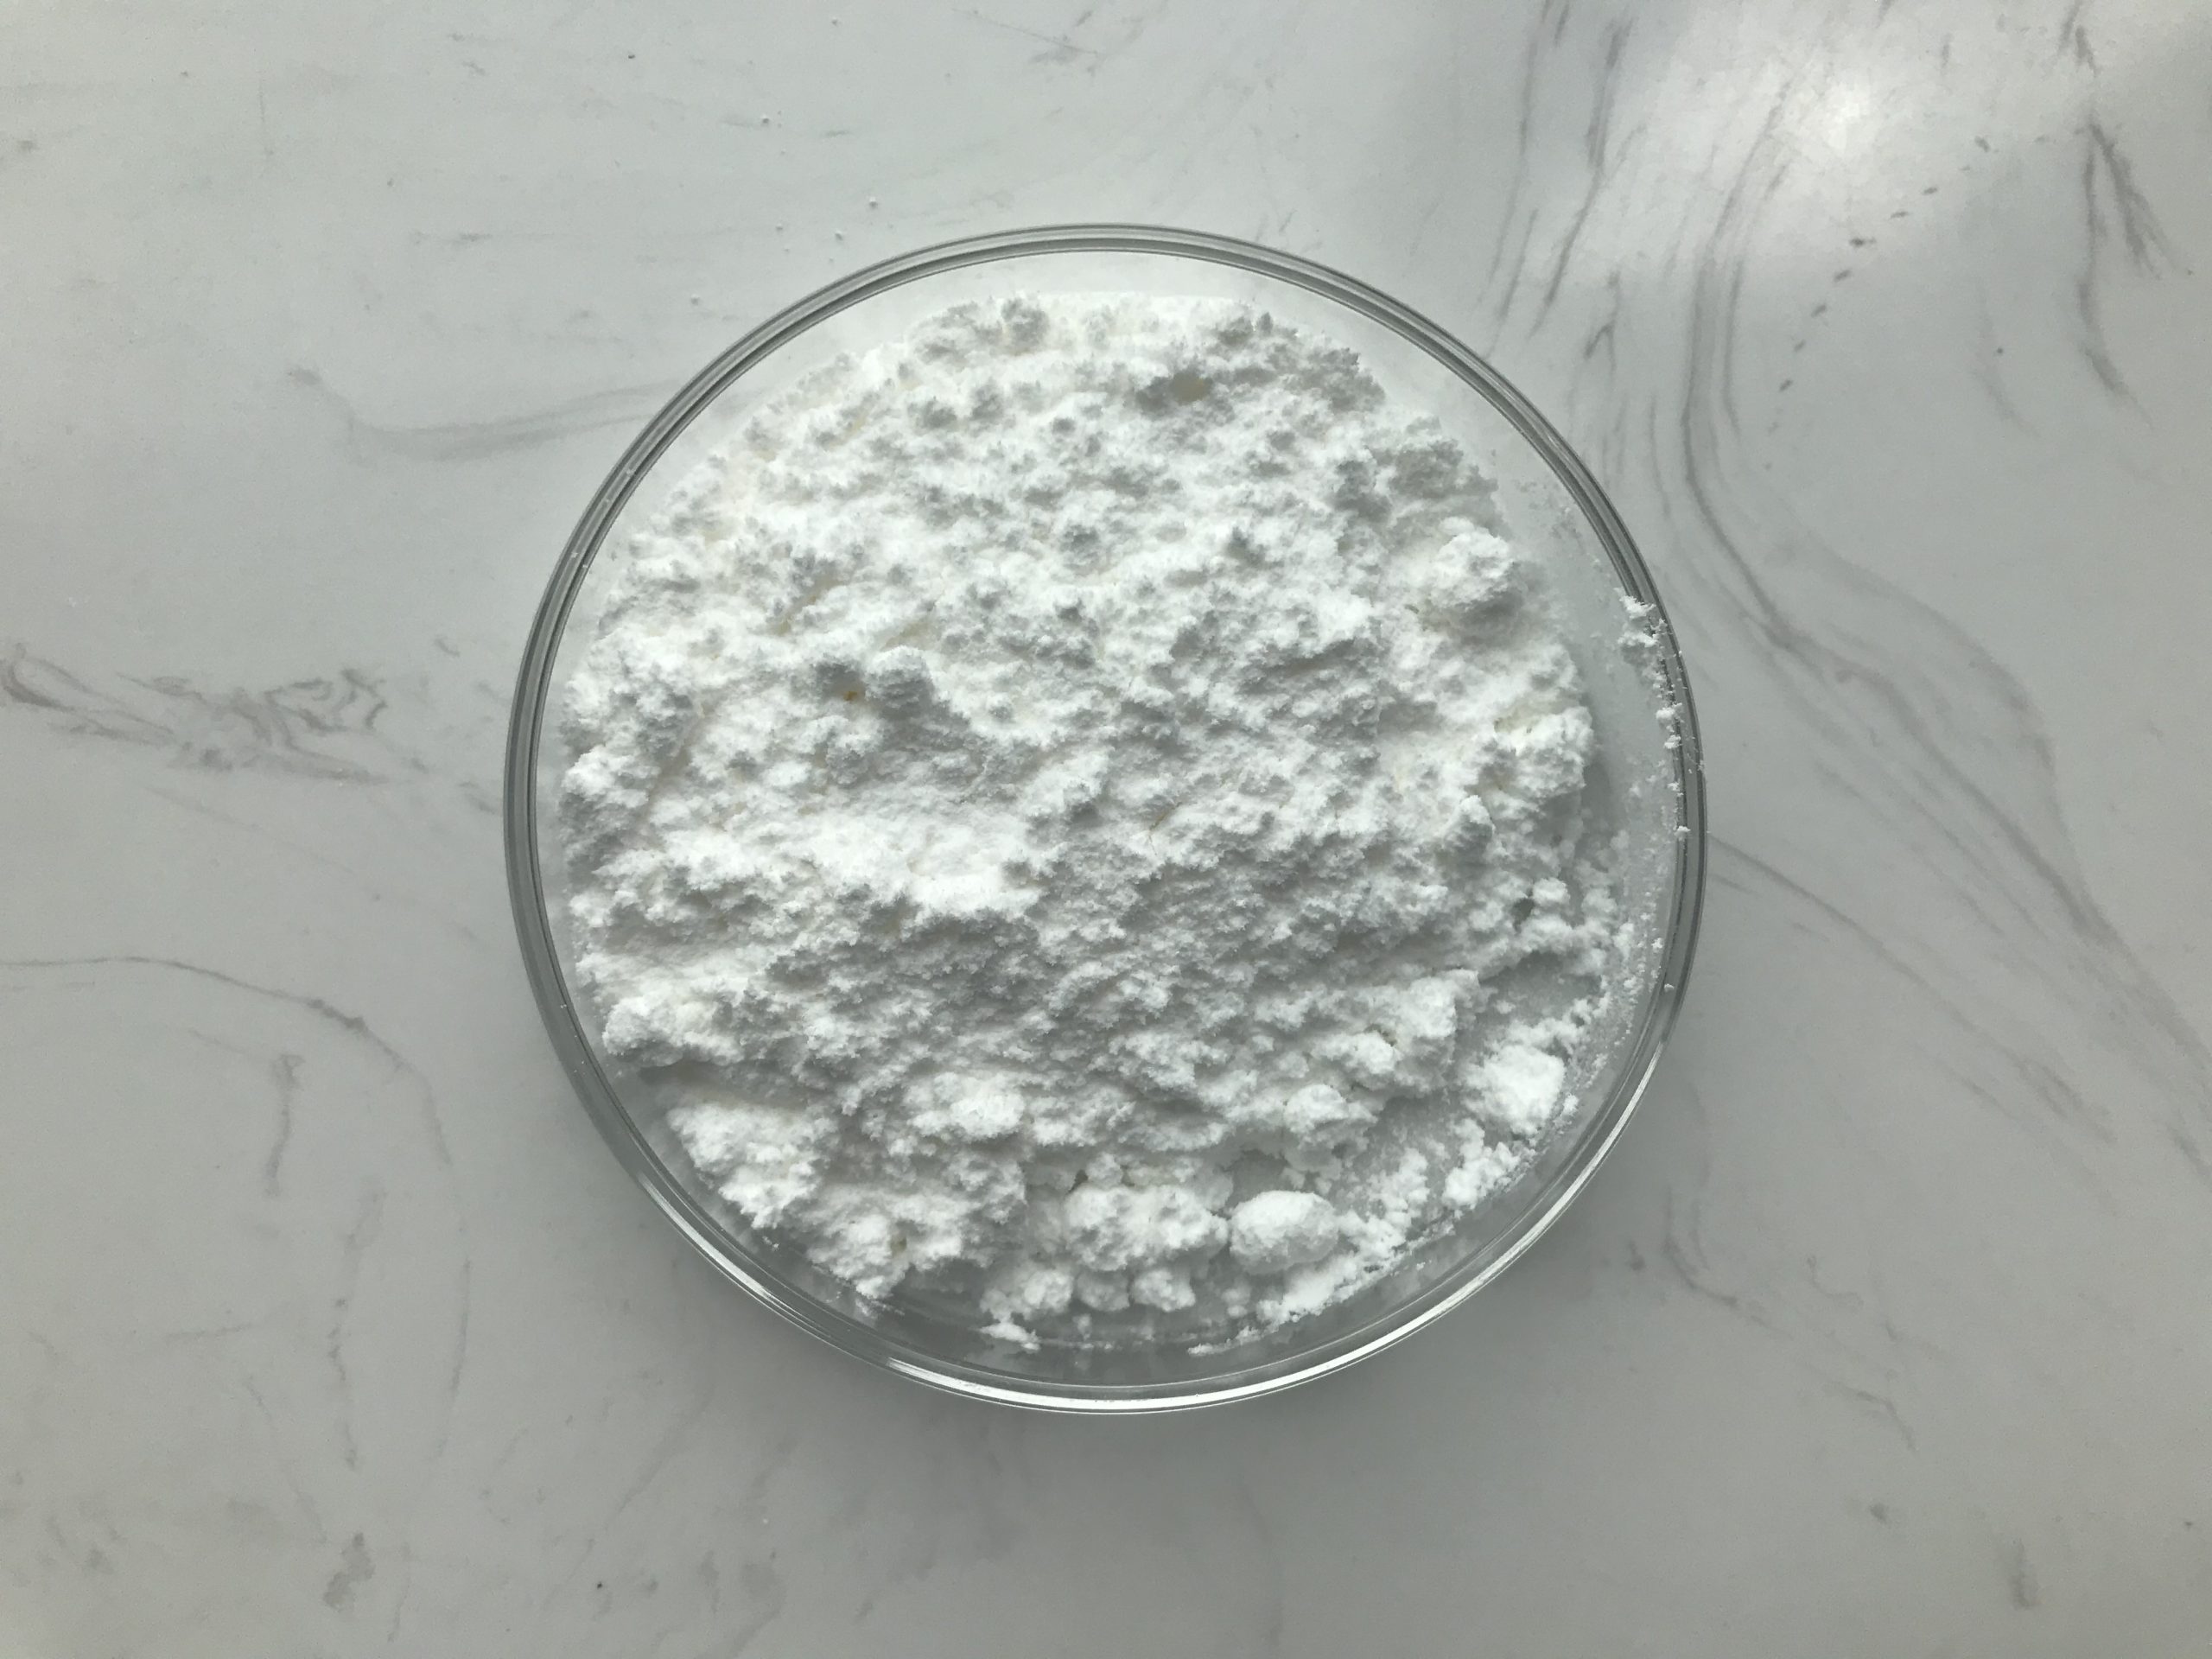 what is the recommended dosage for RU58841 and minoxidil when used together-Xi'an Lyphar Biotech Co., Ltd